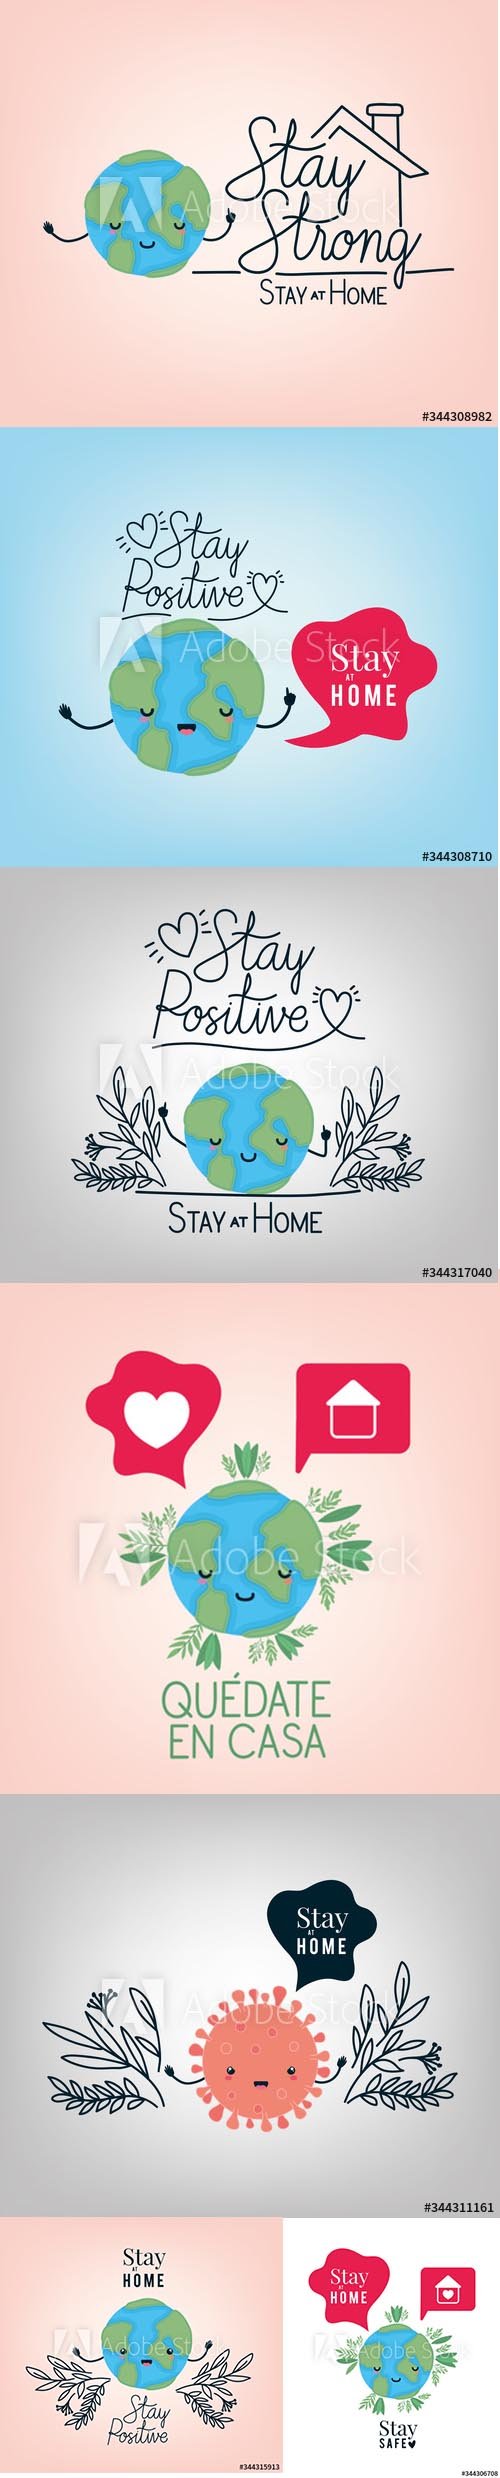 Stay at Home Positive Illustrations Set